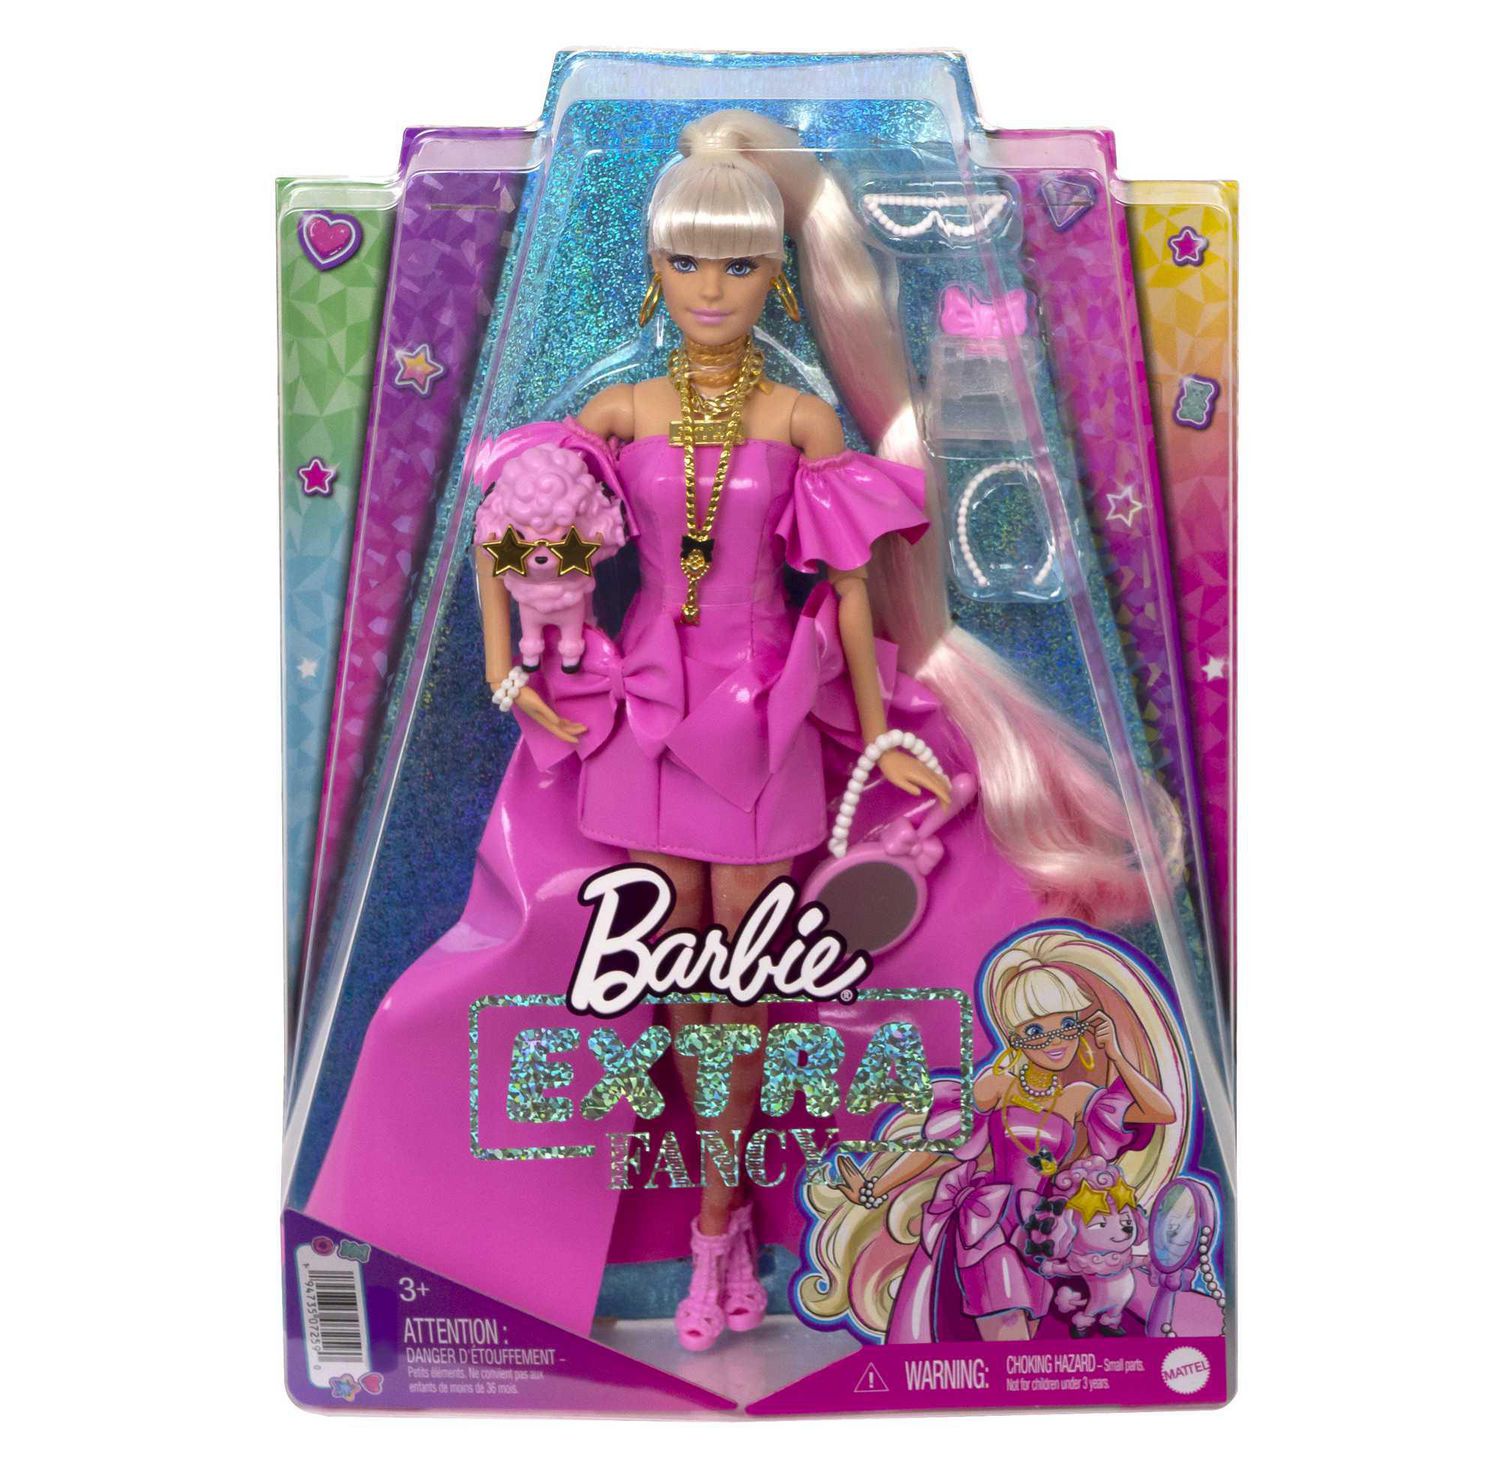 Barbie Extra Fancy Doll in Pink Gown with Pet, Toy for 3 Year Olds